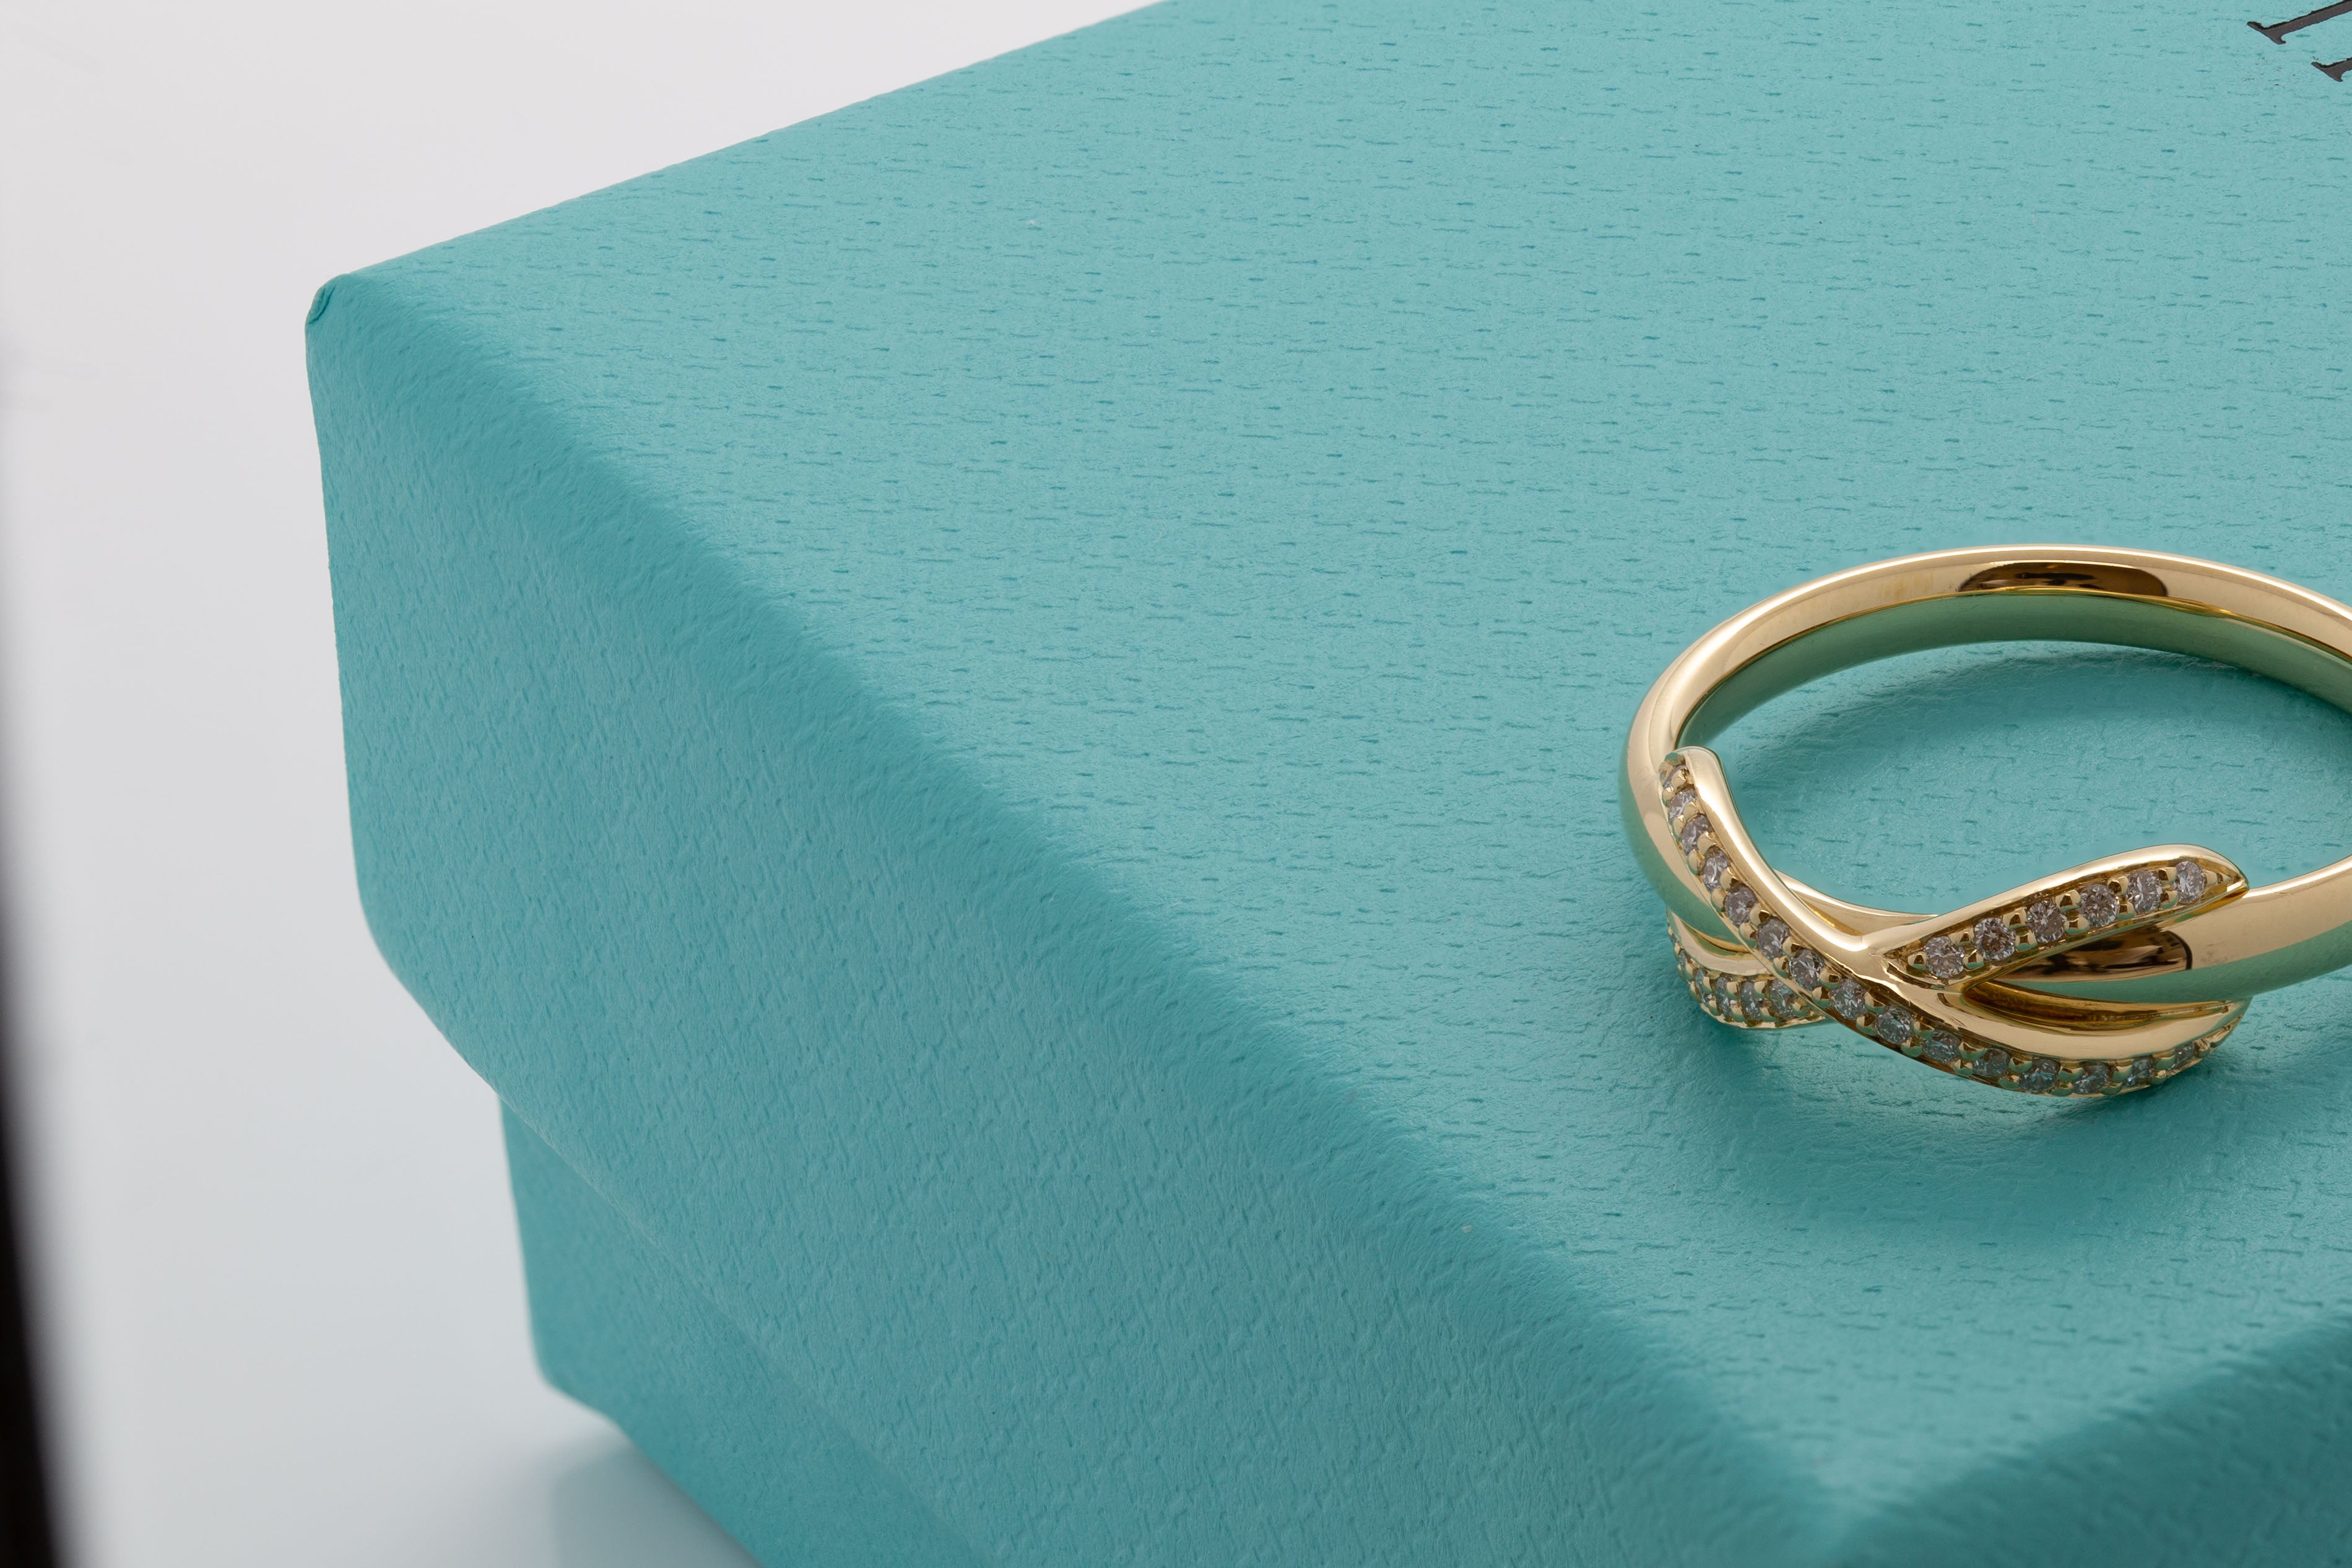 Tiffany & Co. Infinity Ring in 18k Yellow Gold.

With diamonds (around 0.35ct)

Size 6

Comes in a box

Estimate retail value: 4000$